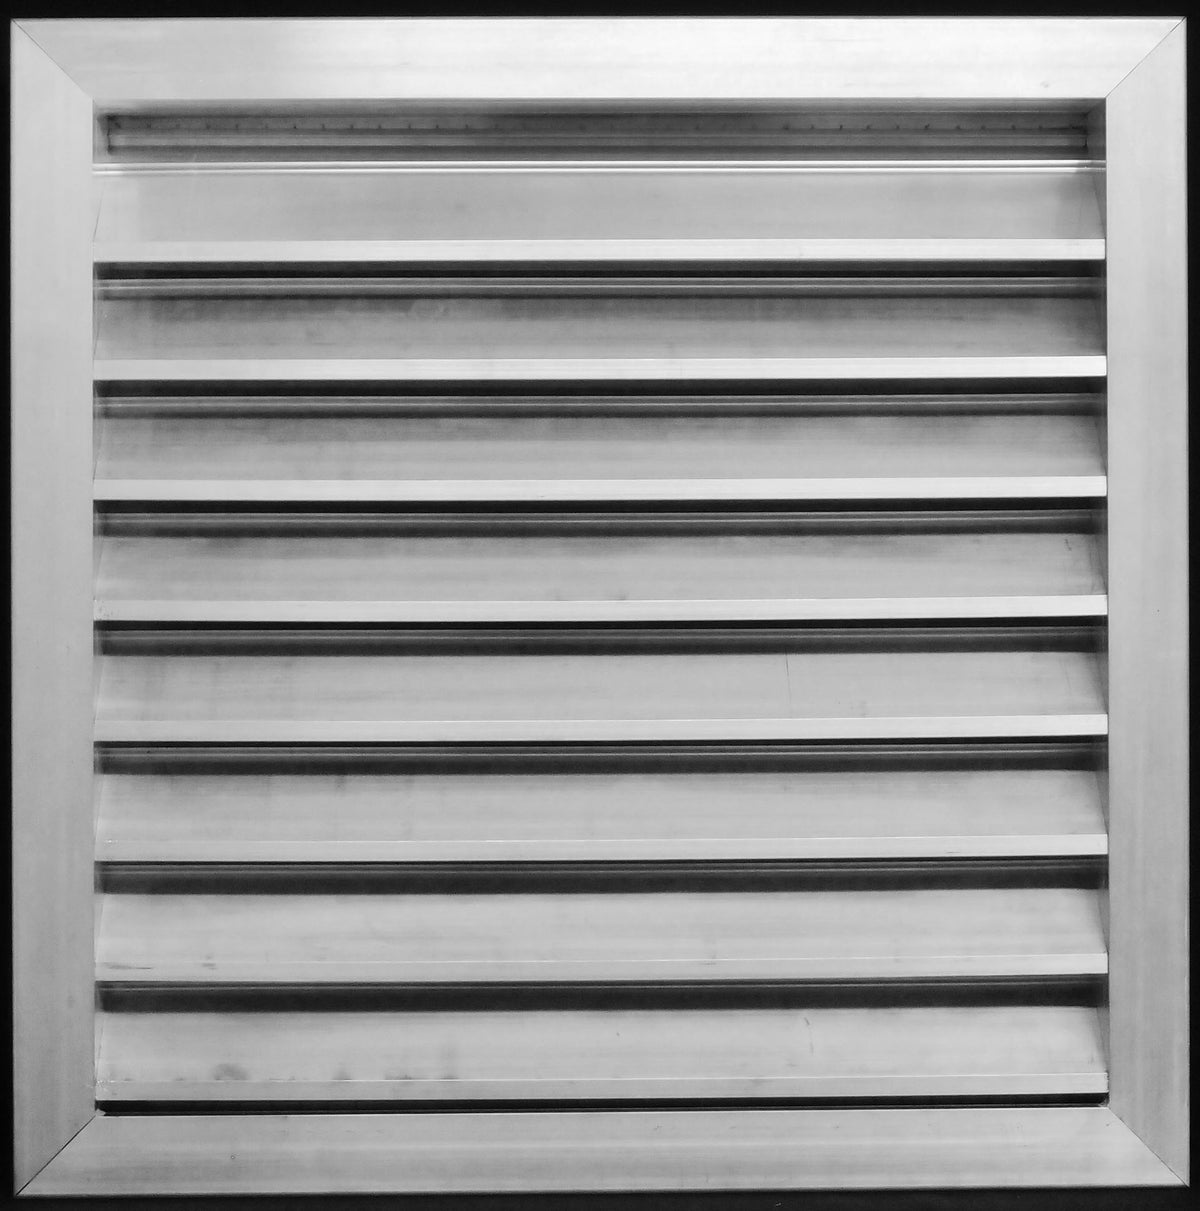 18&quot;w X 18&quot;h Aluminum Outdoor Weather Proof Louvers - Rain &amp; Waterproof Air Vent With Screen Mesh